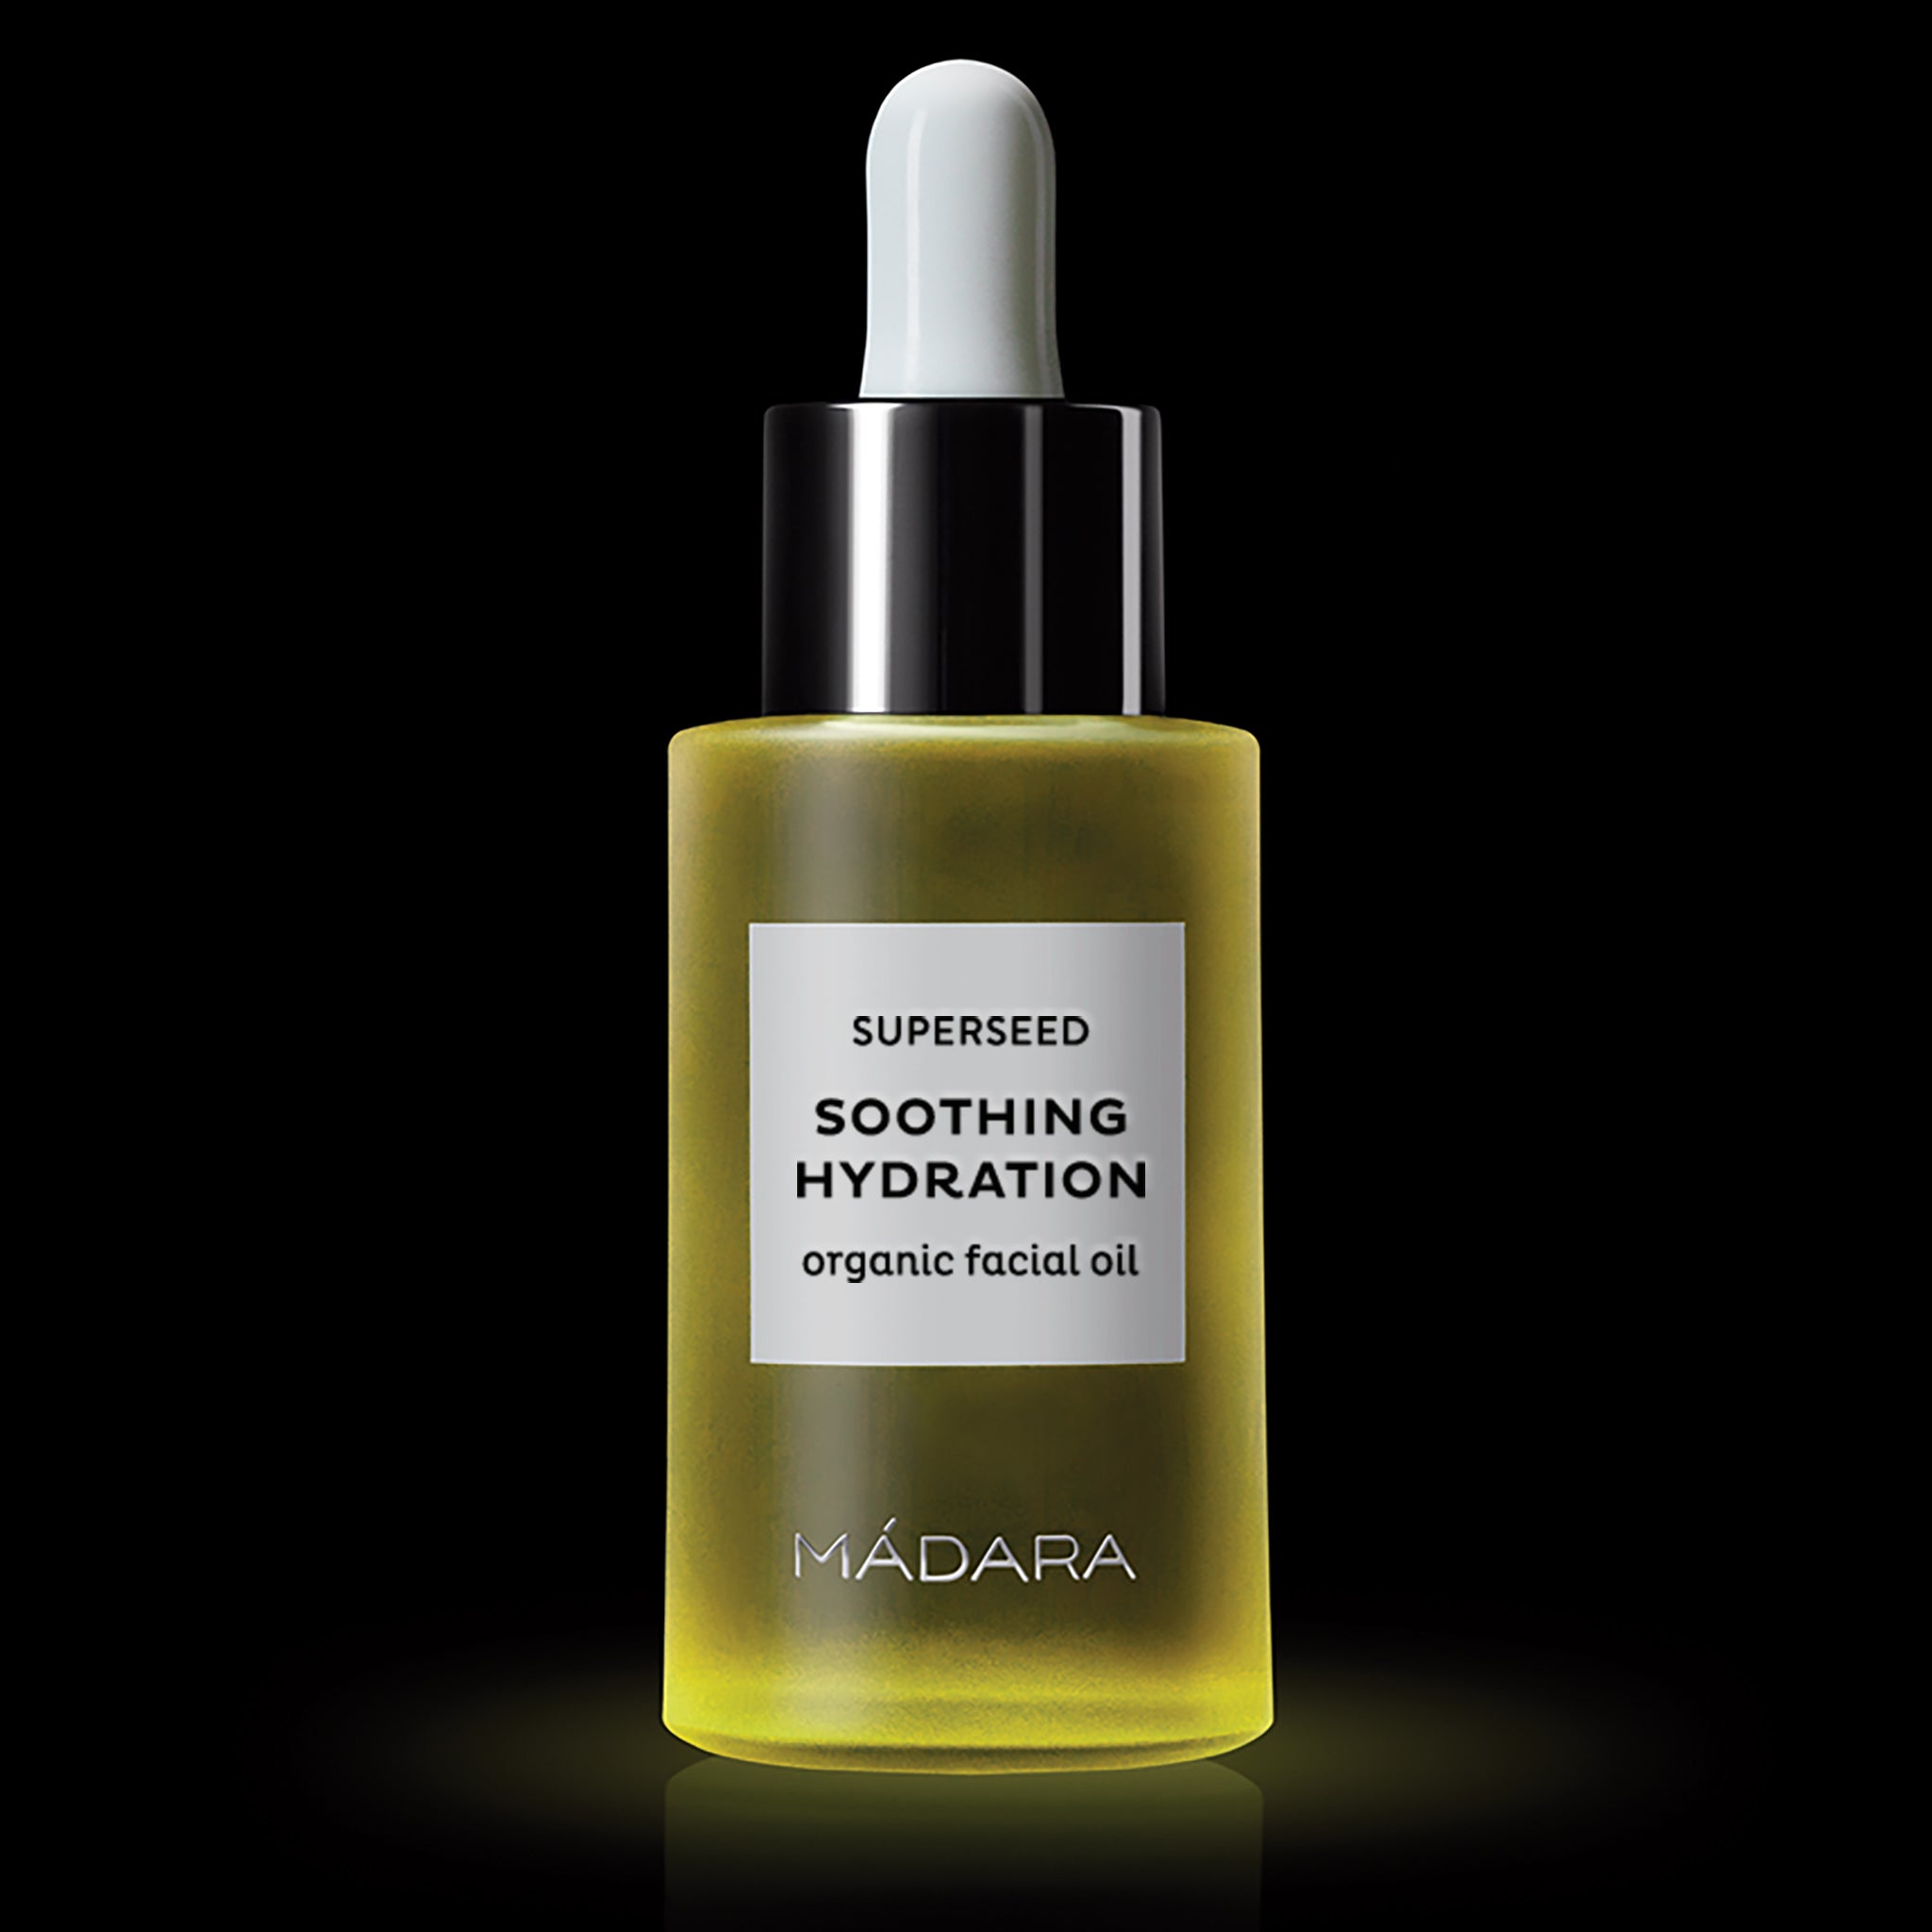 Superseed Soothing Hydration Organic Facial Oil - mypure.co.uk